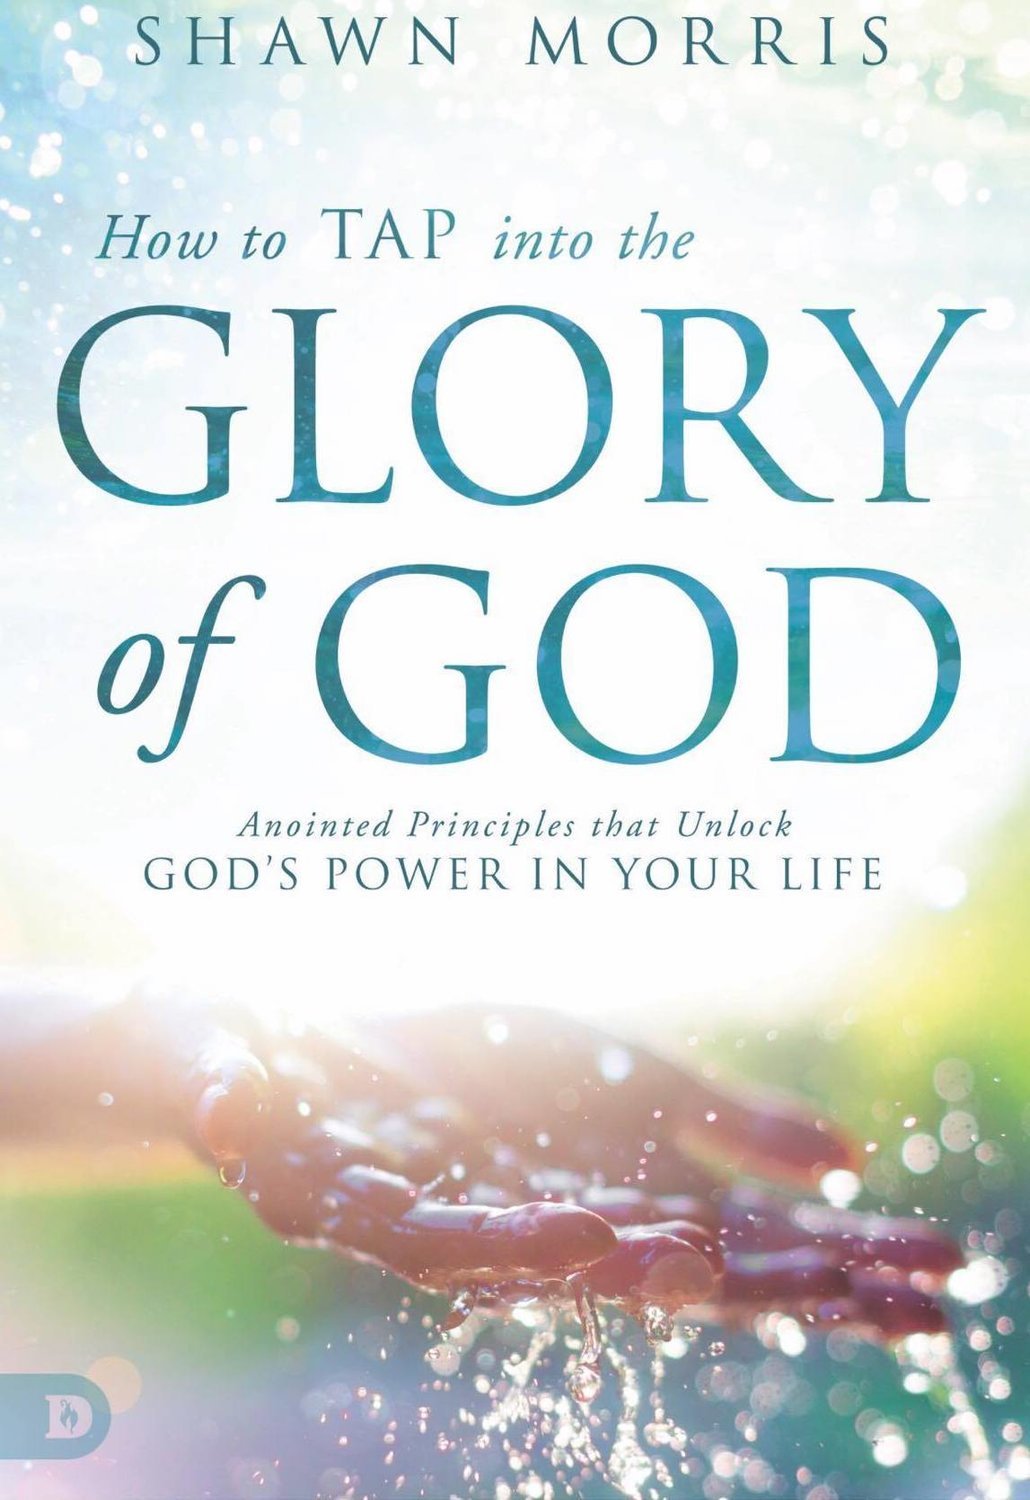 How to Tap into the Glory of God